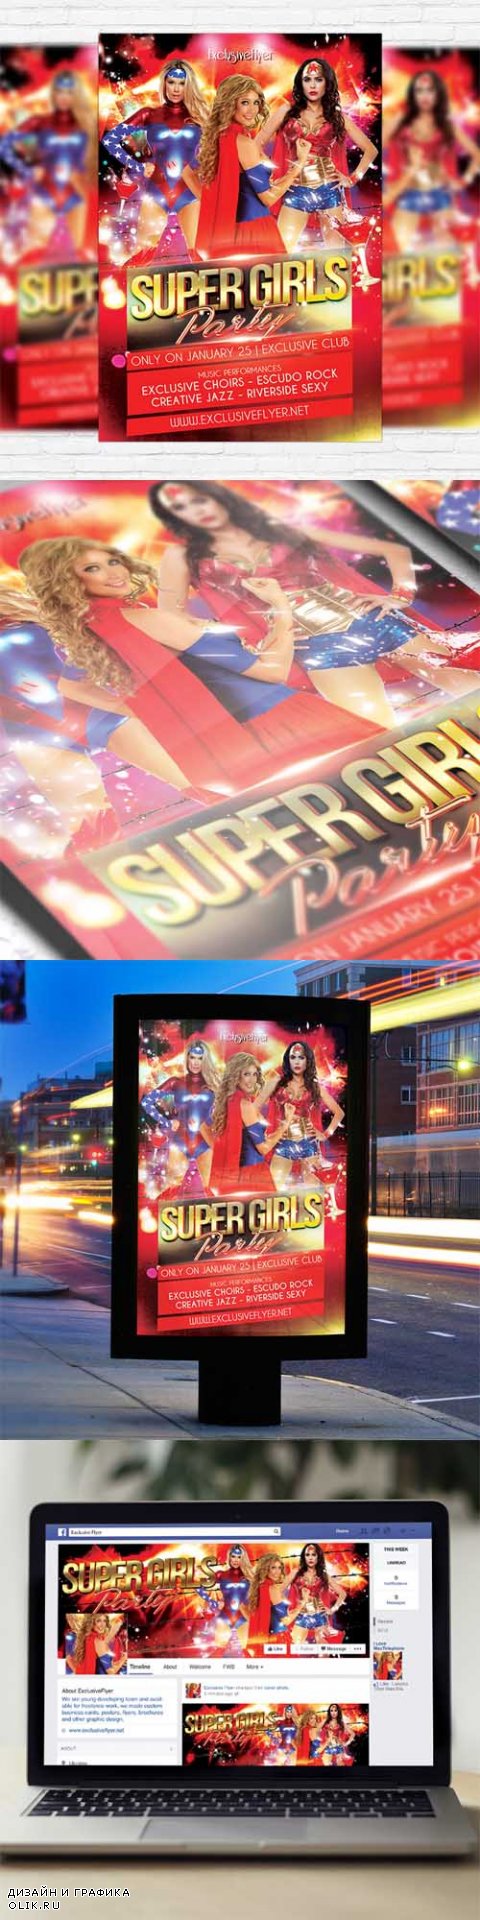 Flyer Template - Super Girls Party + Facebook Cover